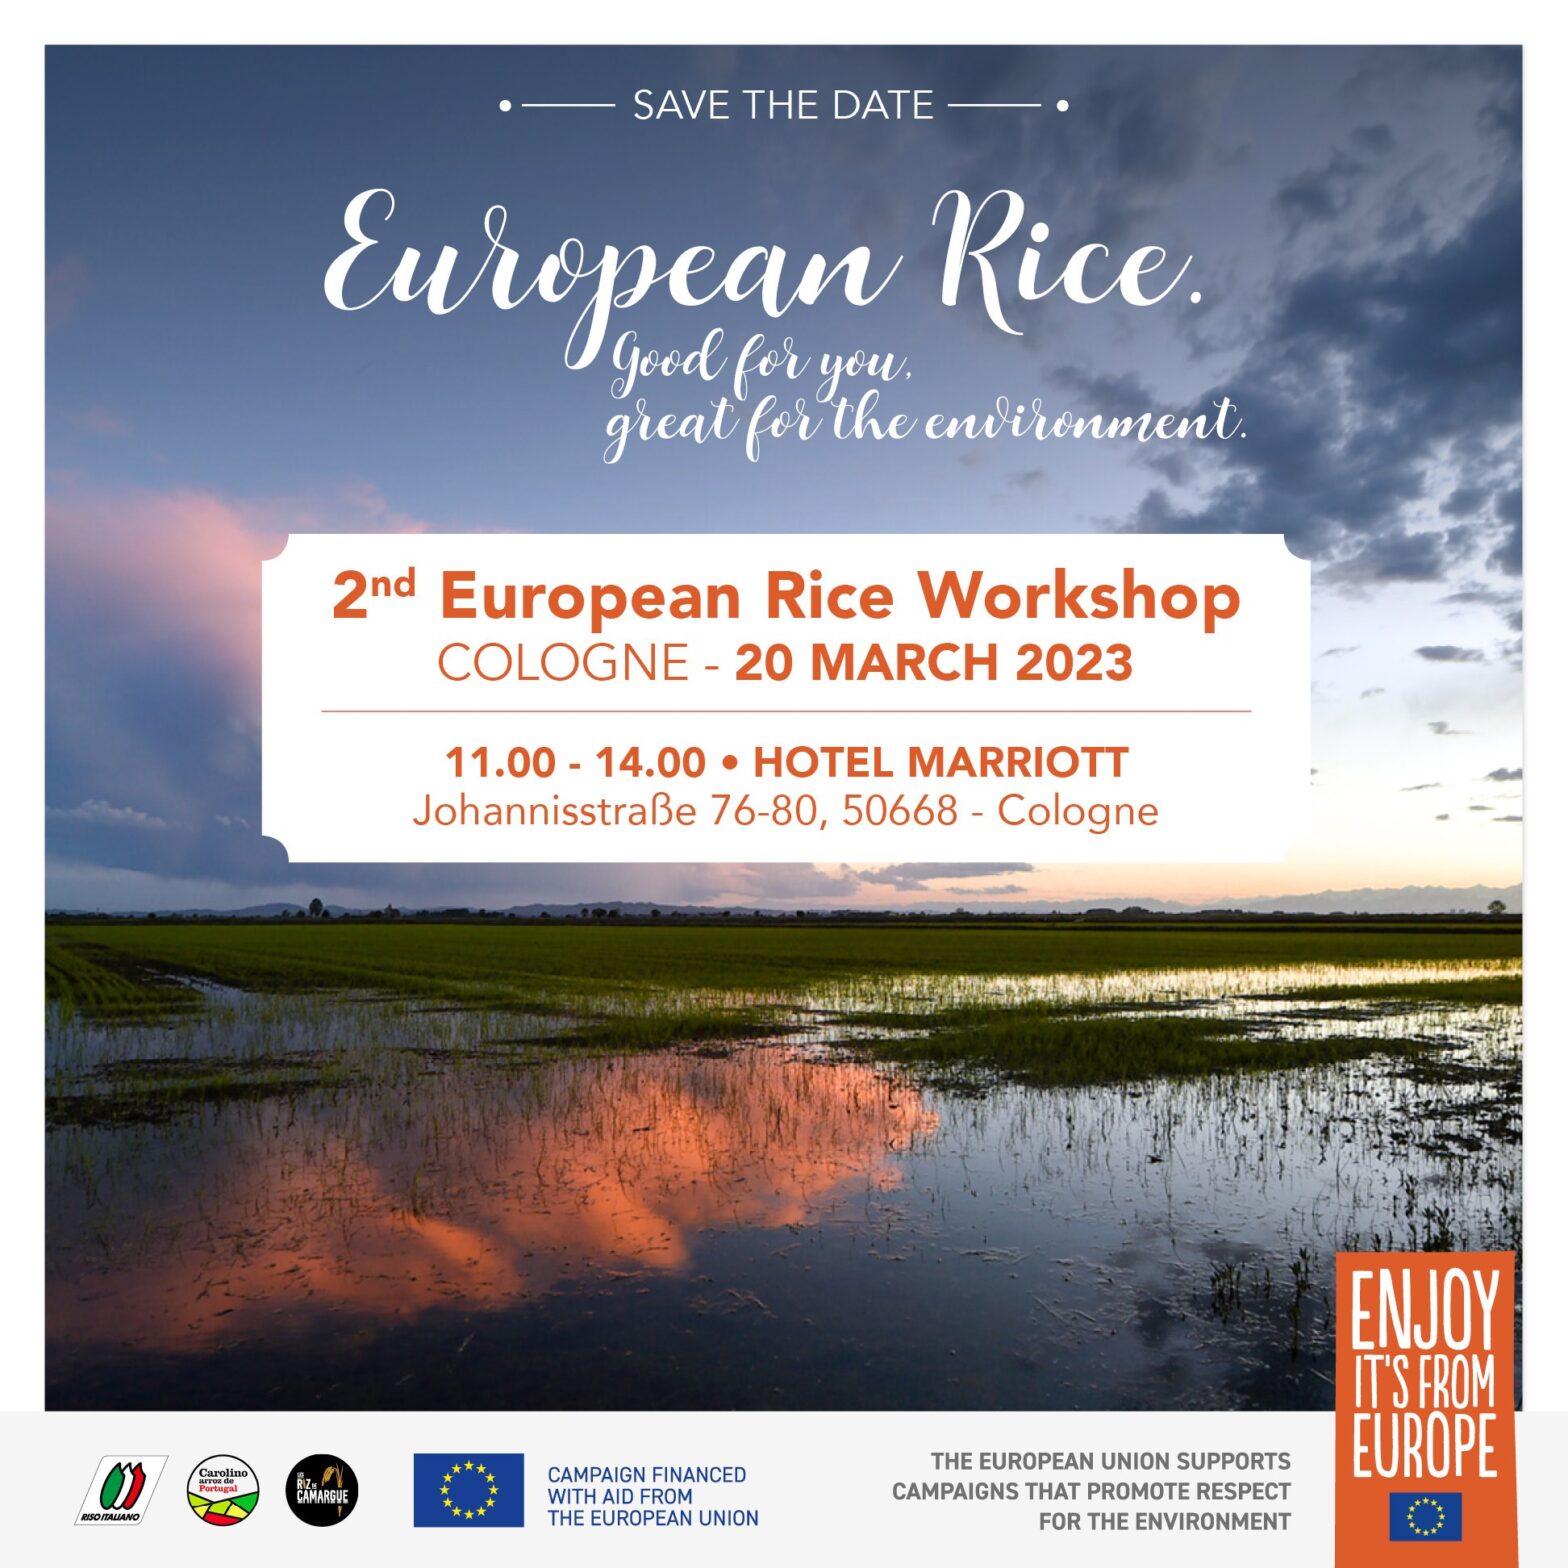 Cologne hosts 2nd European Sustainable Rice Workshop